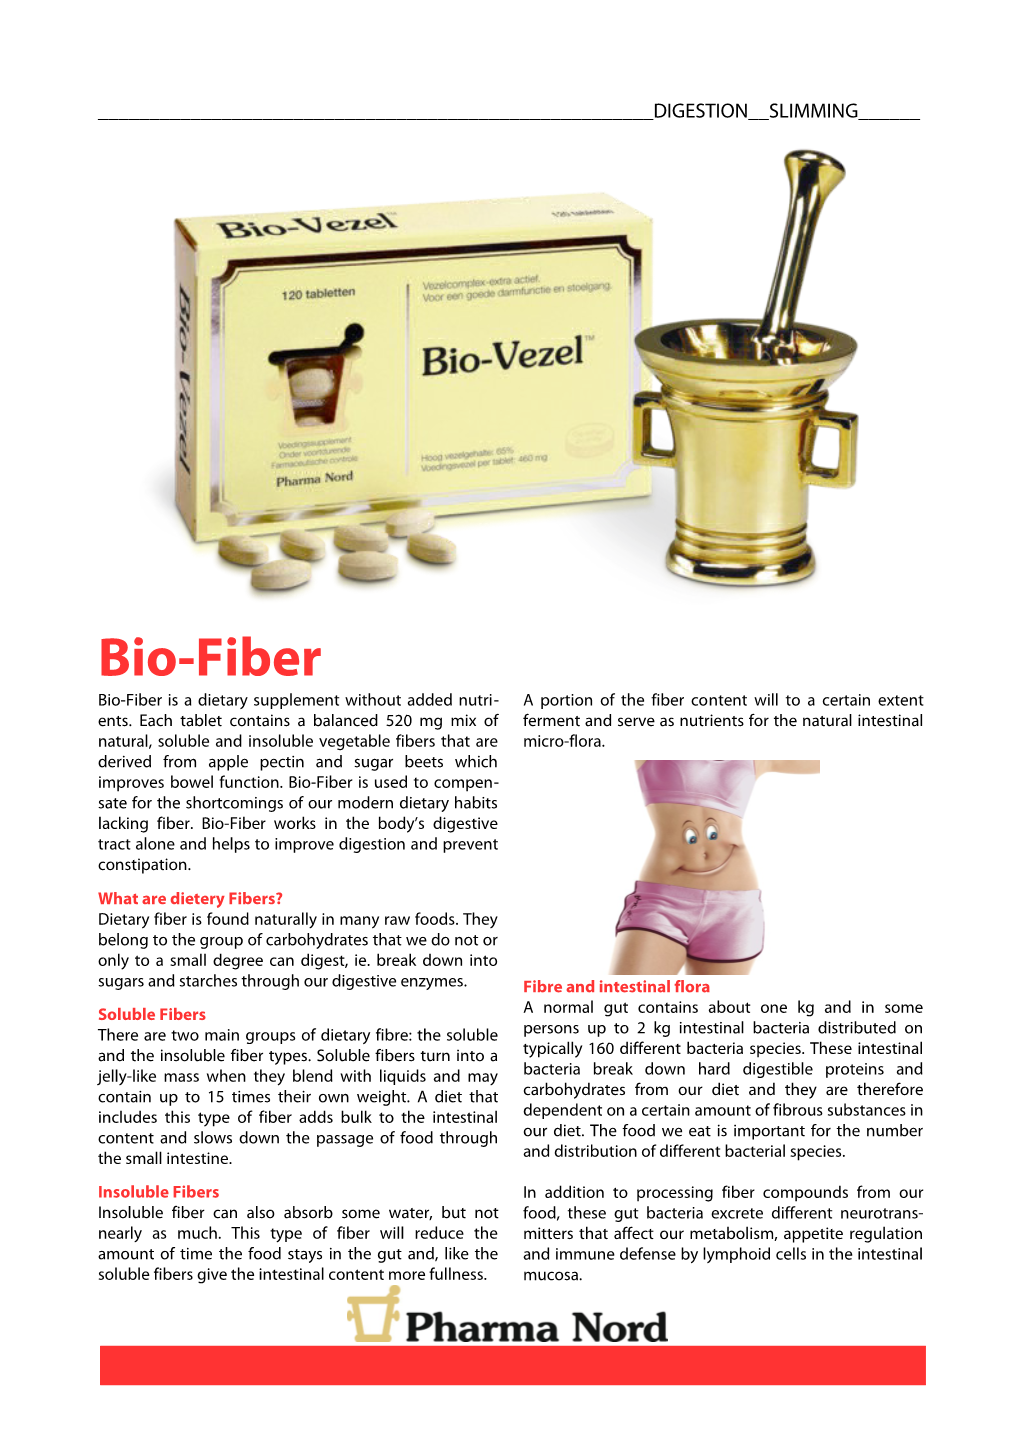 Bio-Fiber Bio-Fiber Is a Dietary Supplement Without Added Nutri- a Portion of the Fiber Content Will to a Certain Extent Ents